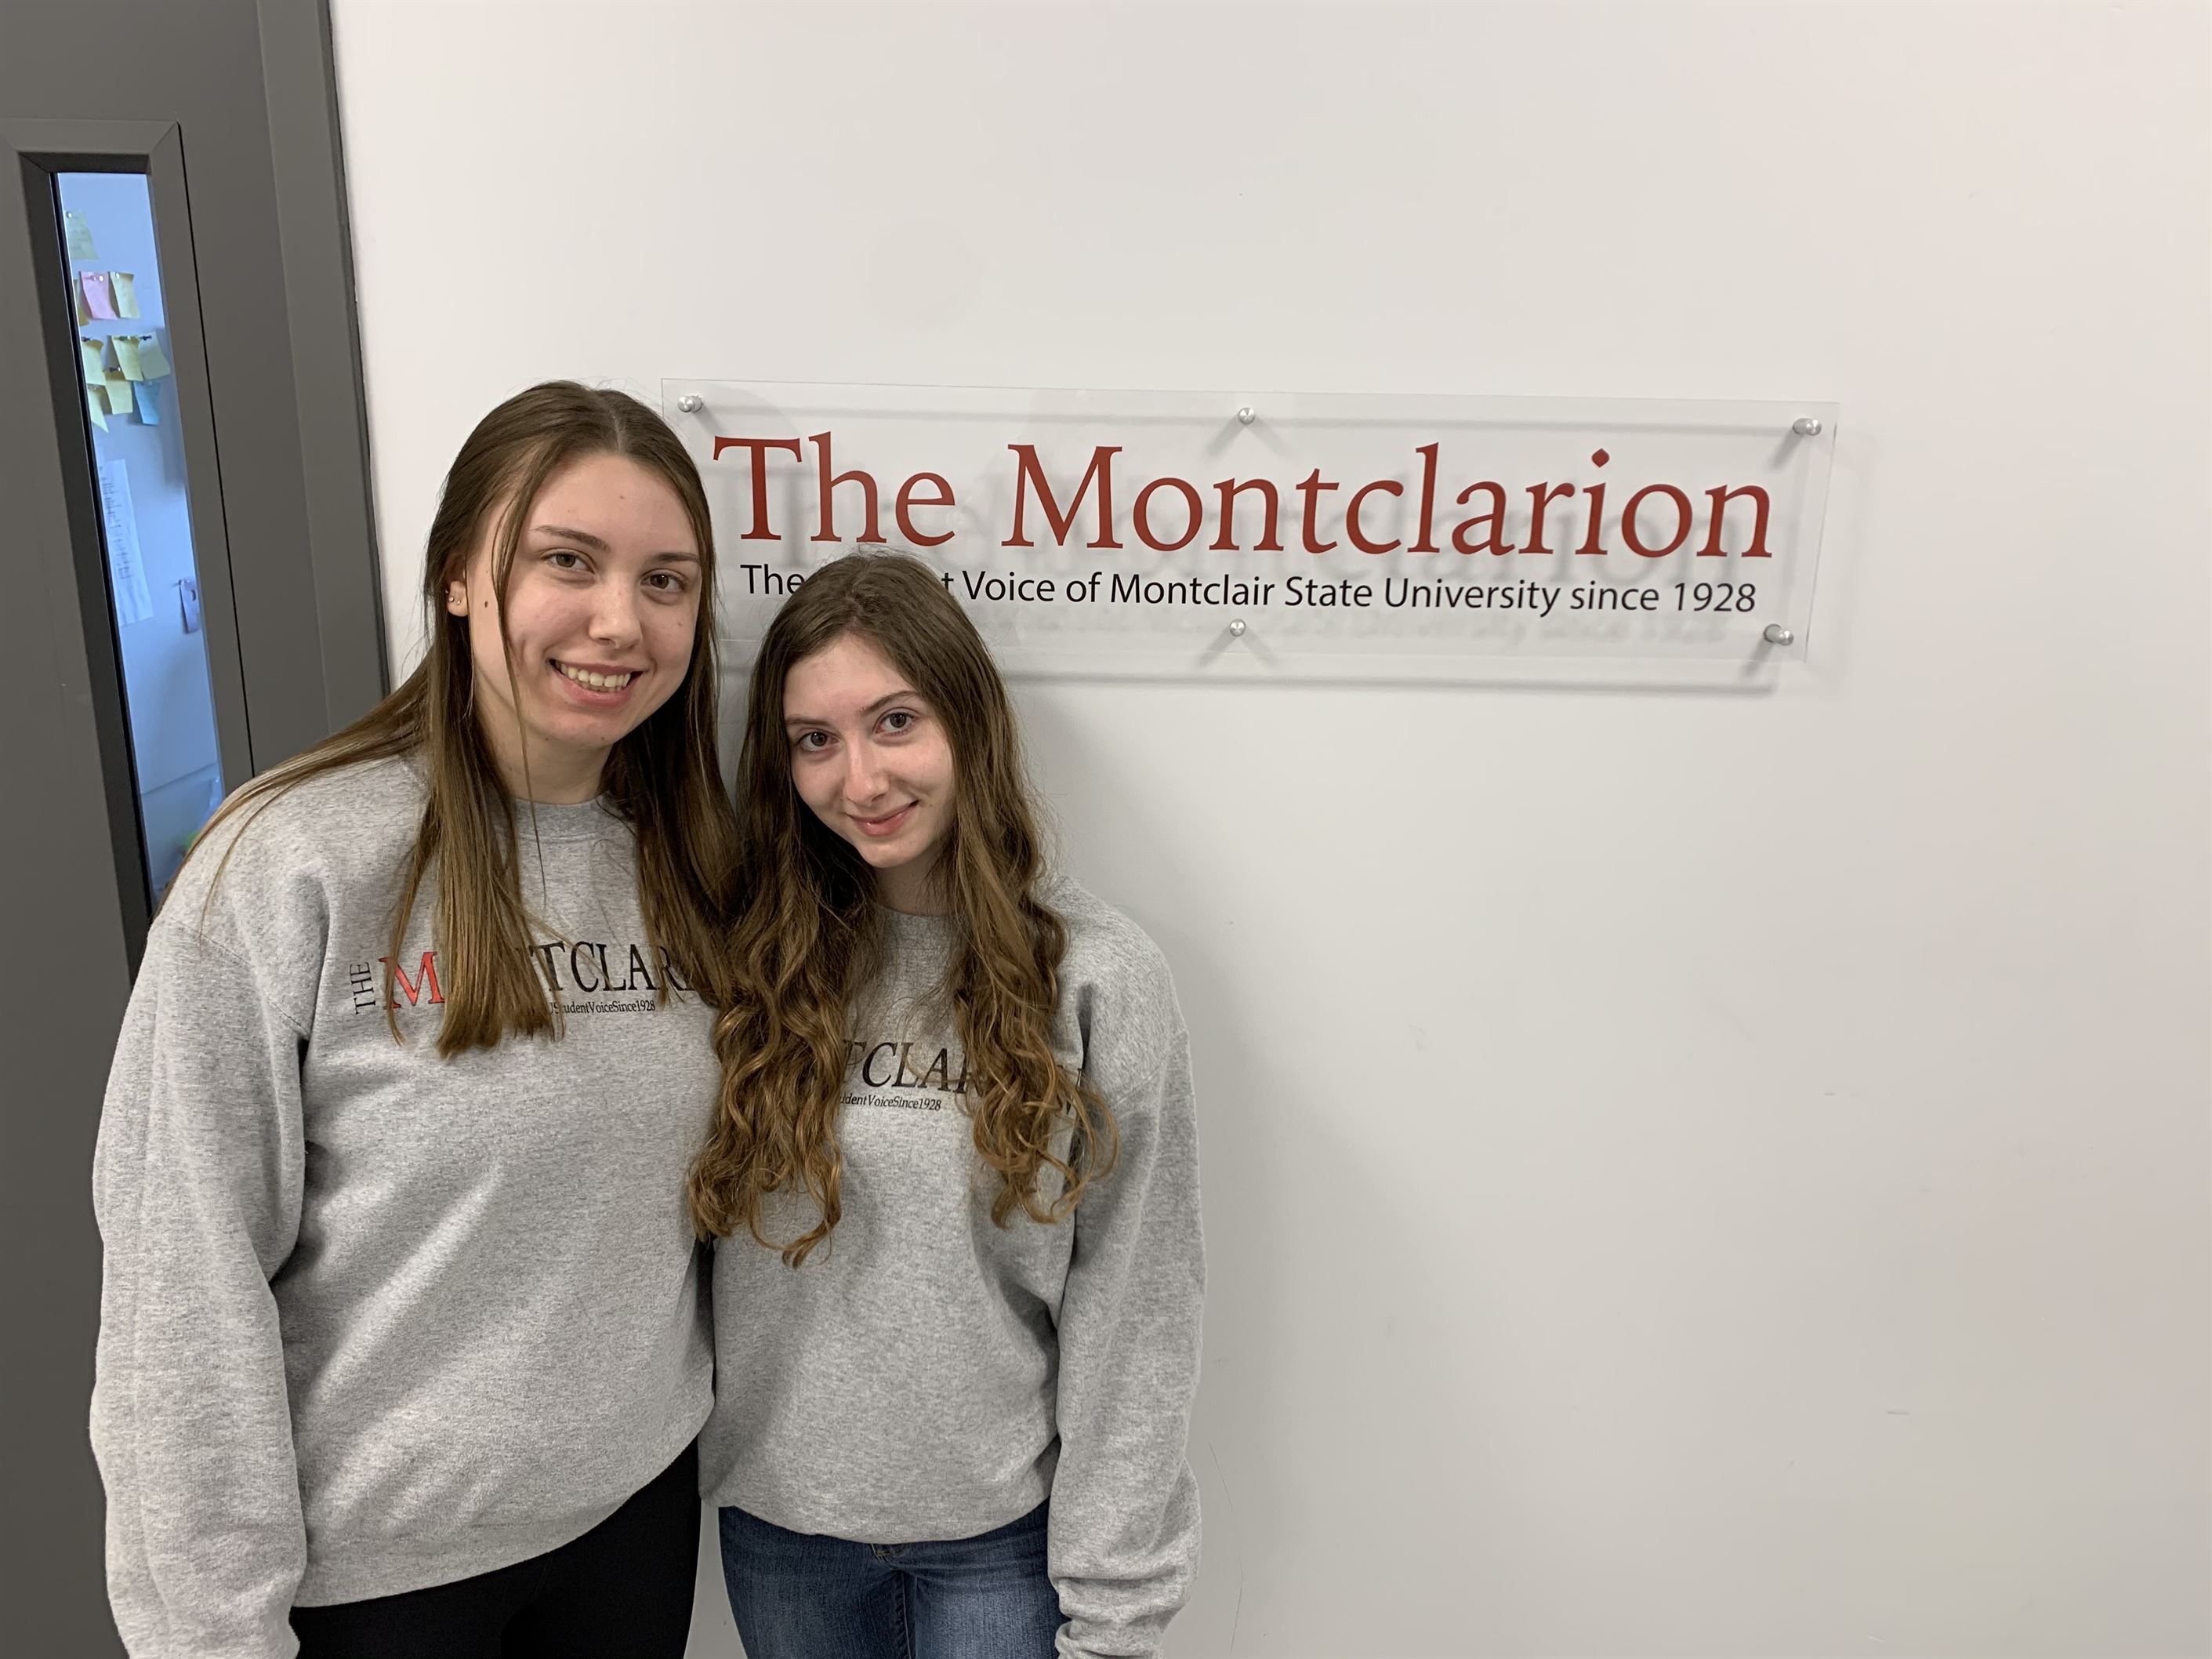 Lo Presti and Impaglia have become good friends while working for The Montclarion together. Thomas Neira | The Montclarion